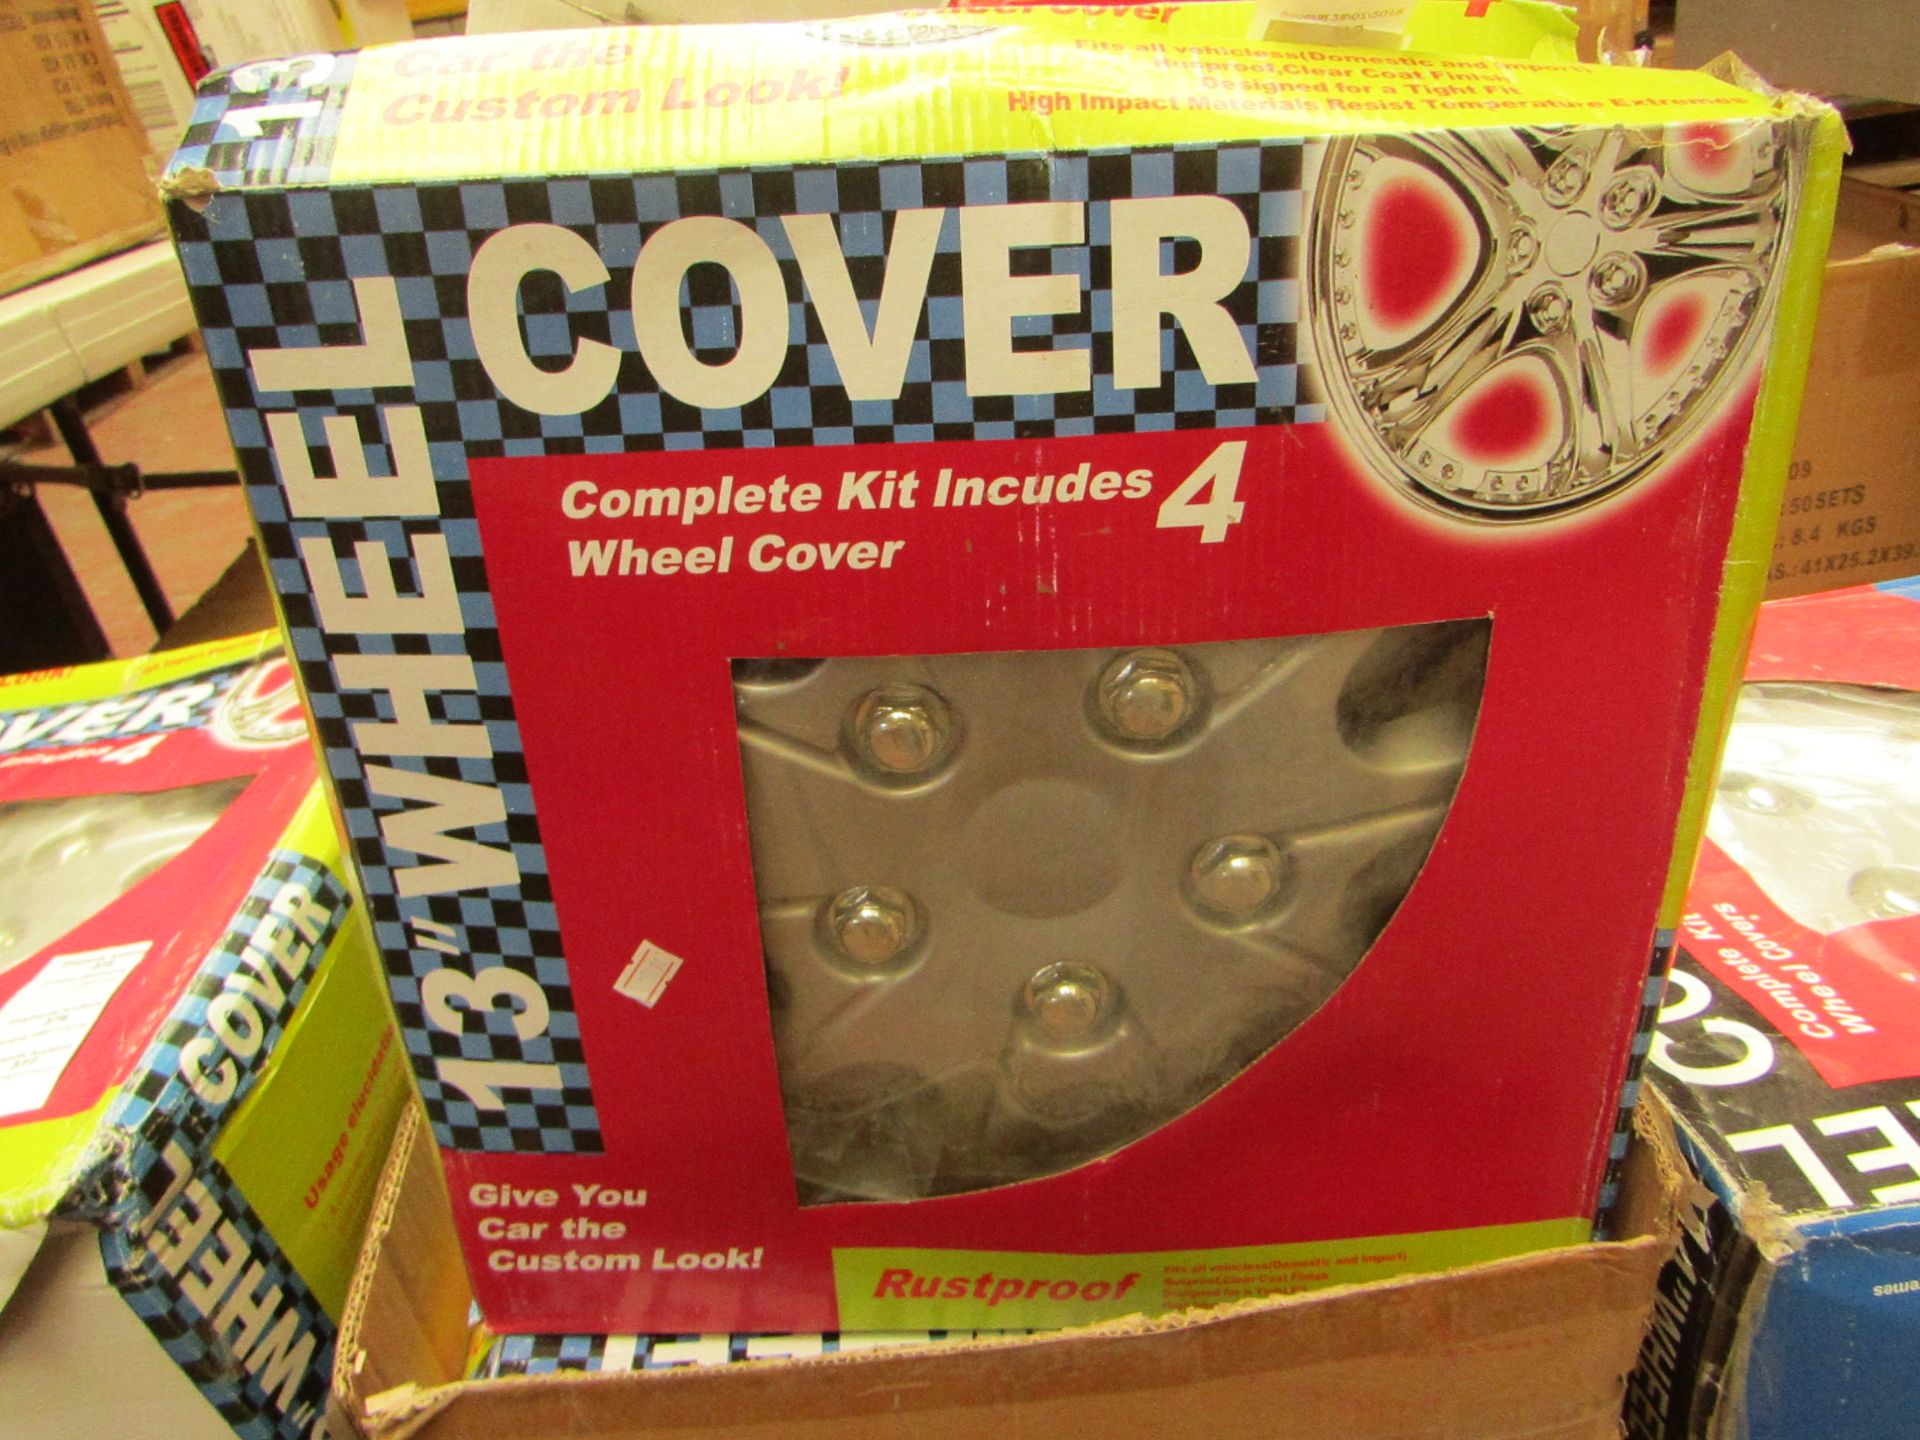 Set of 4 13" wheel covers, new and boxed.